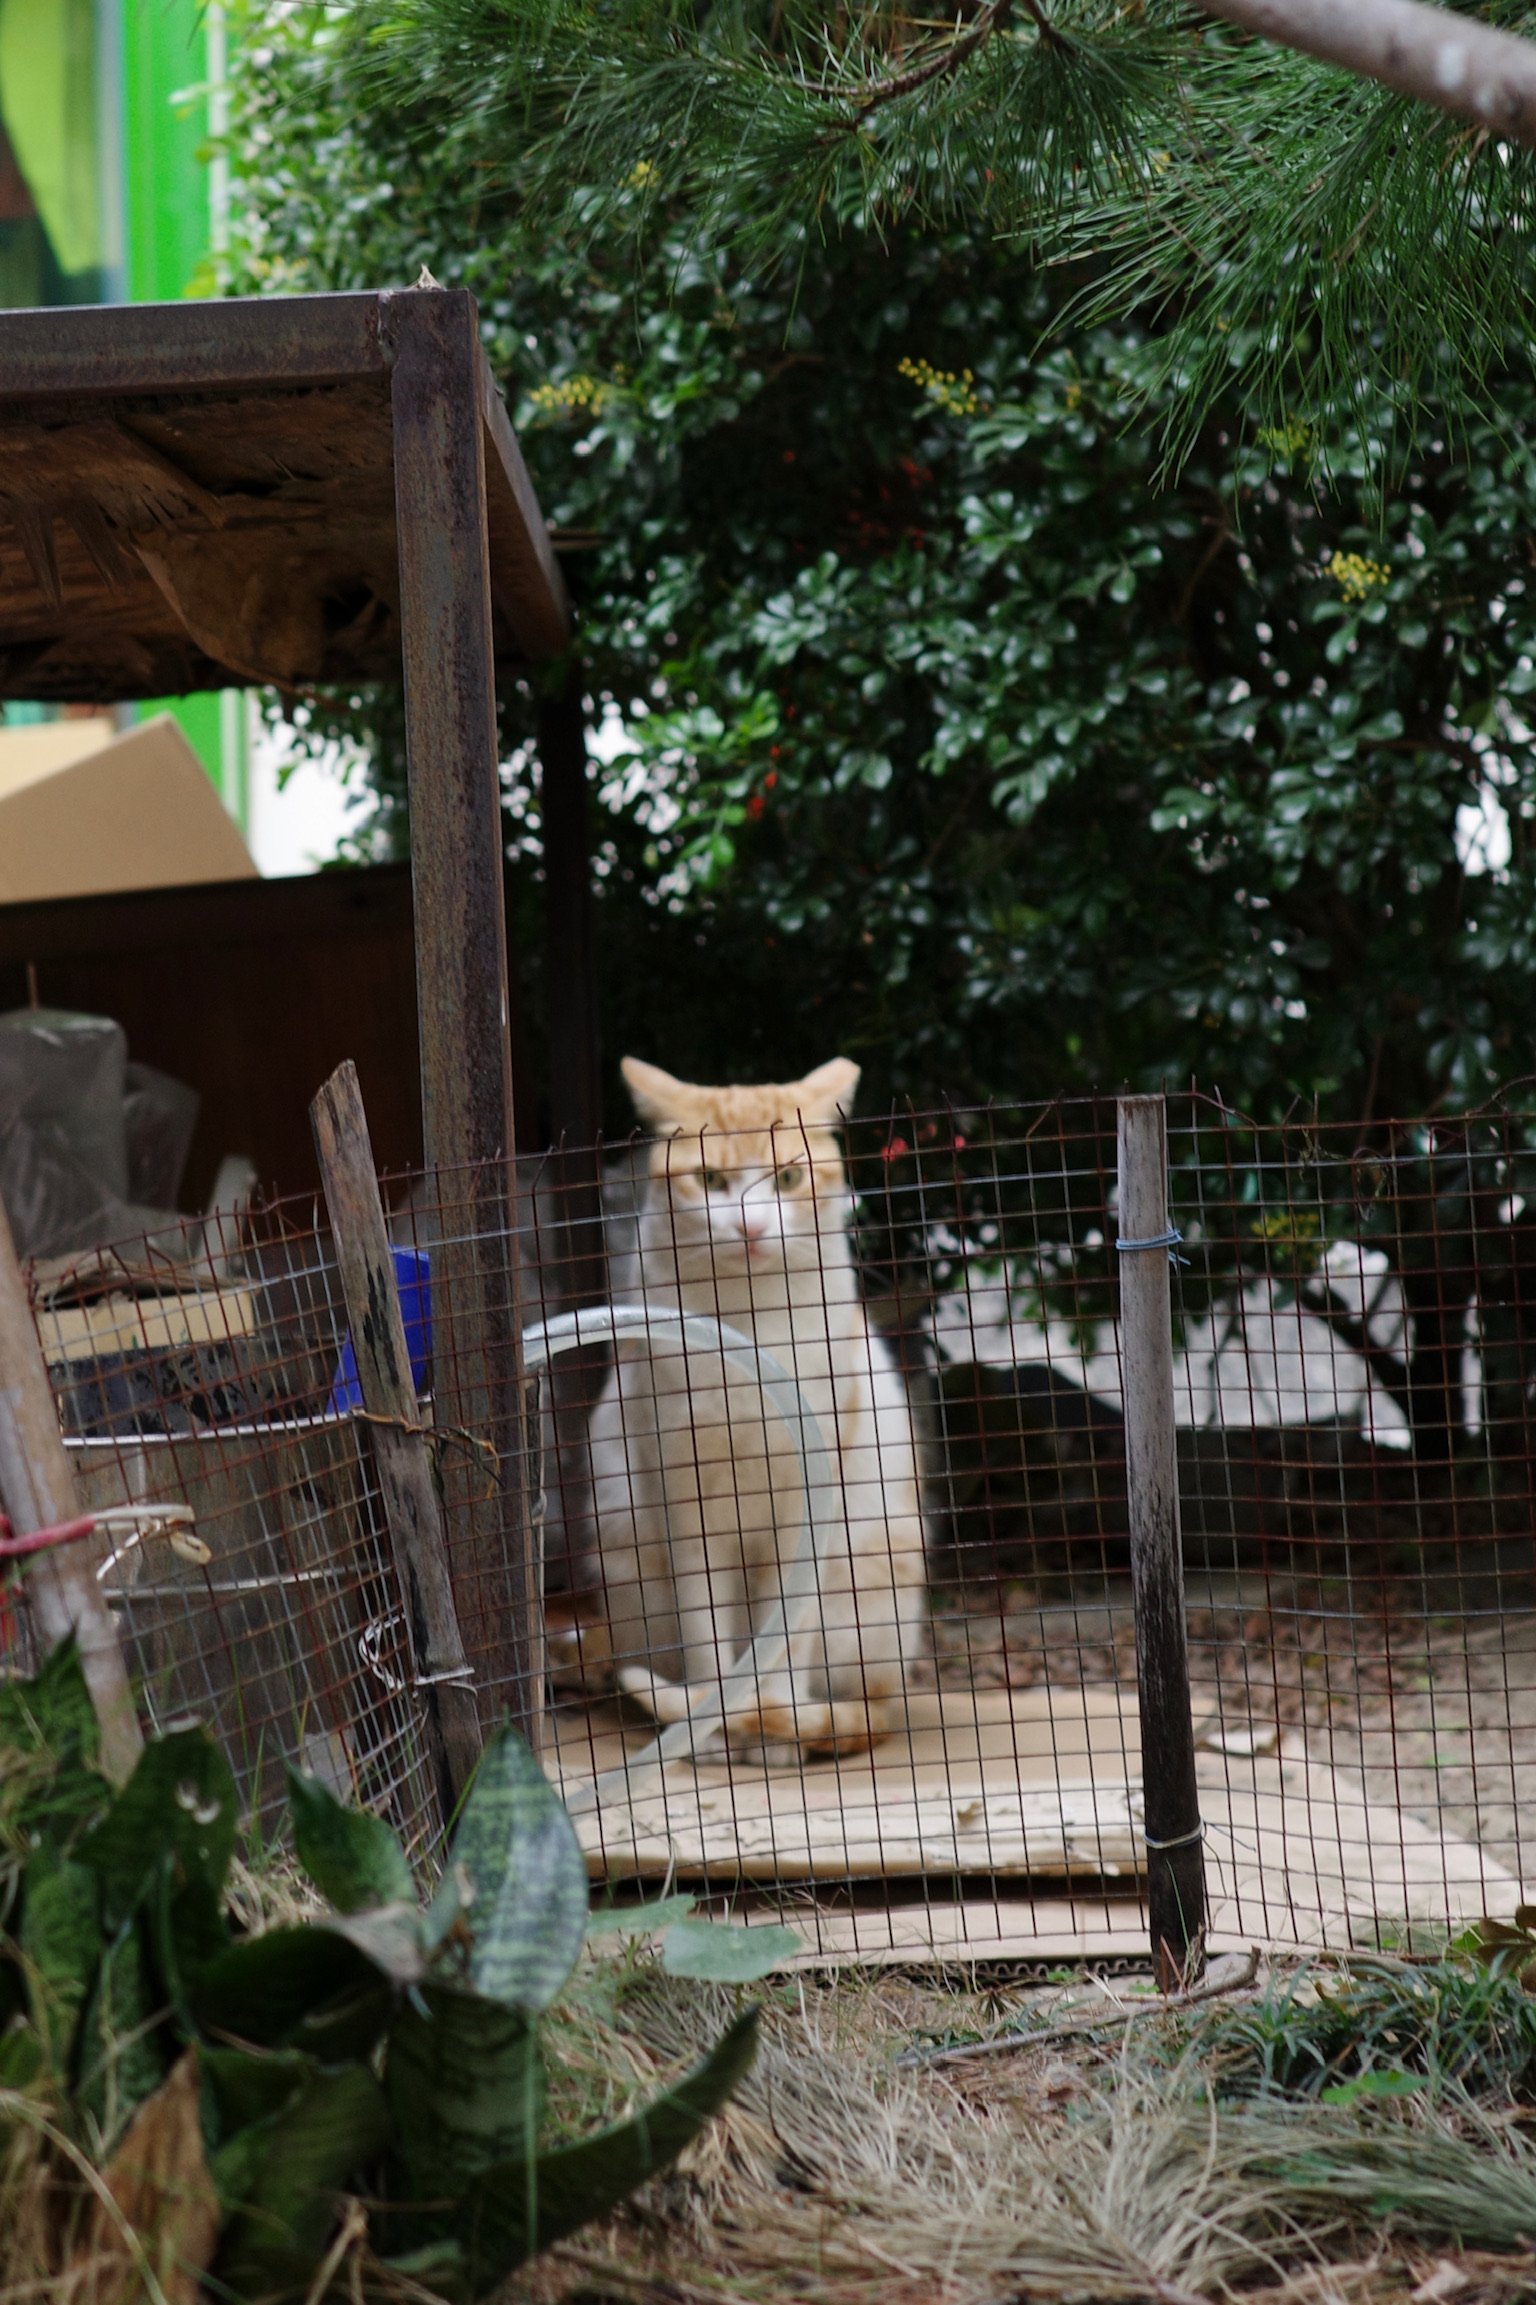 A cat sitting looking menacingly towards the camera behind a wired fence.